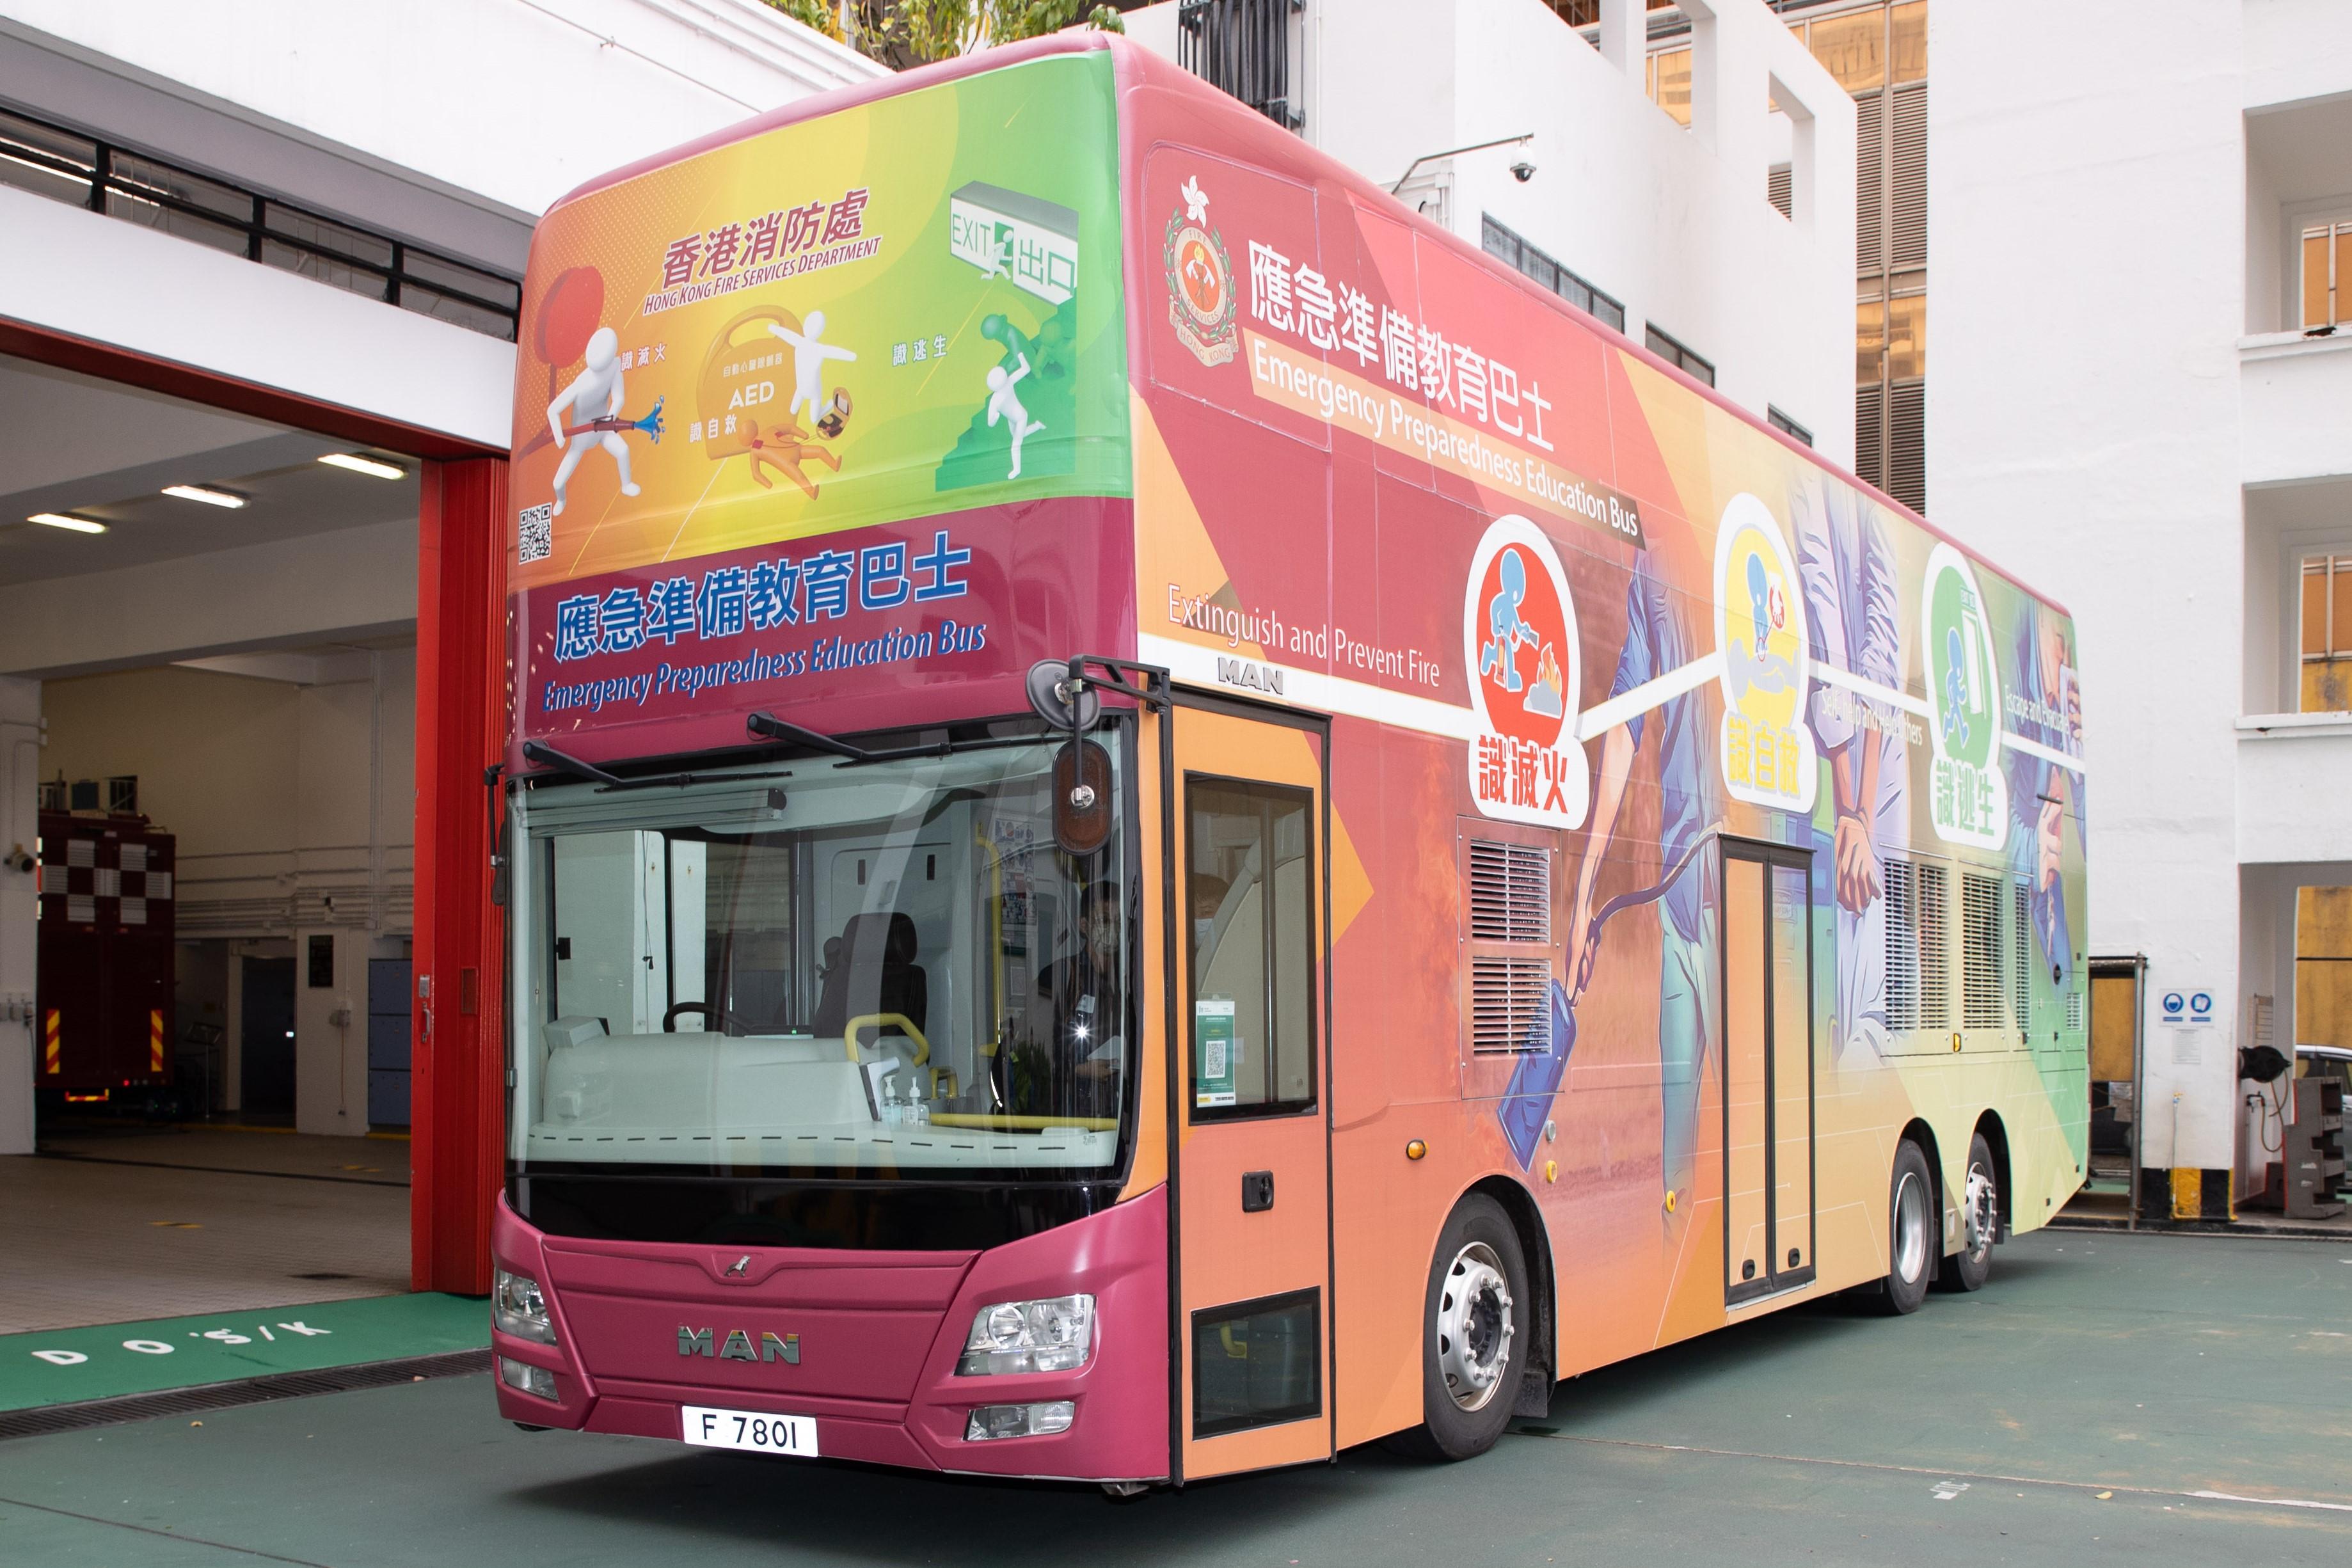 The Fire Services Department today (November 30) held a launching ceremony of the Fire Safety Activities during Festive Season Campaign 2022 at Tsim Sha Tsui Fire Station. Photo shows the Emergency Preparedness Education Bus which promotes fire prevention messages in the community.